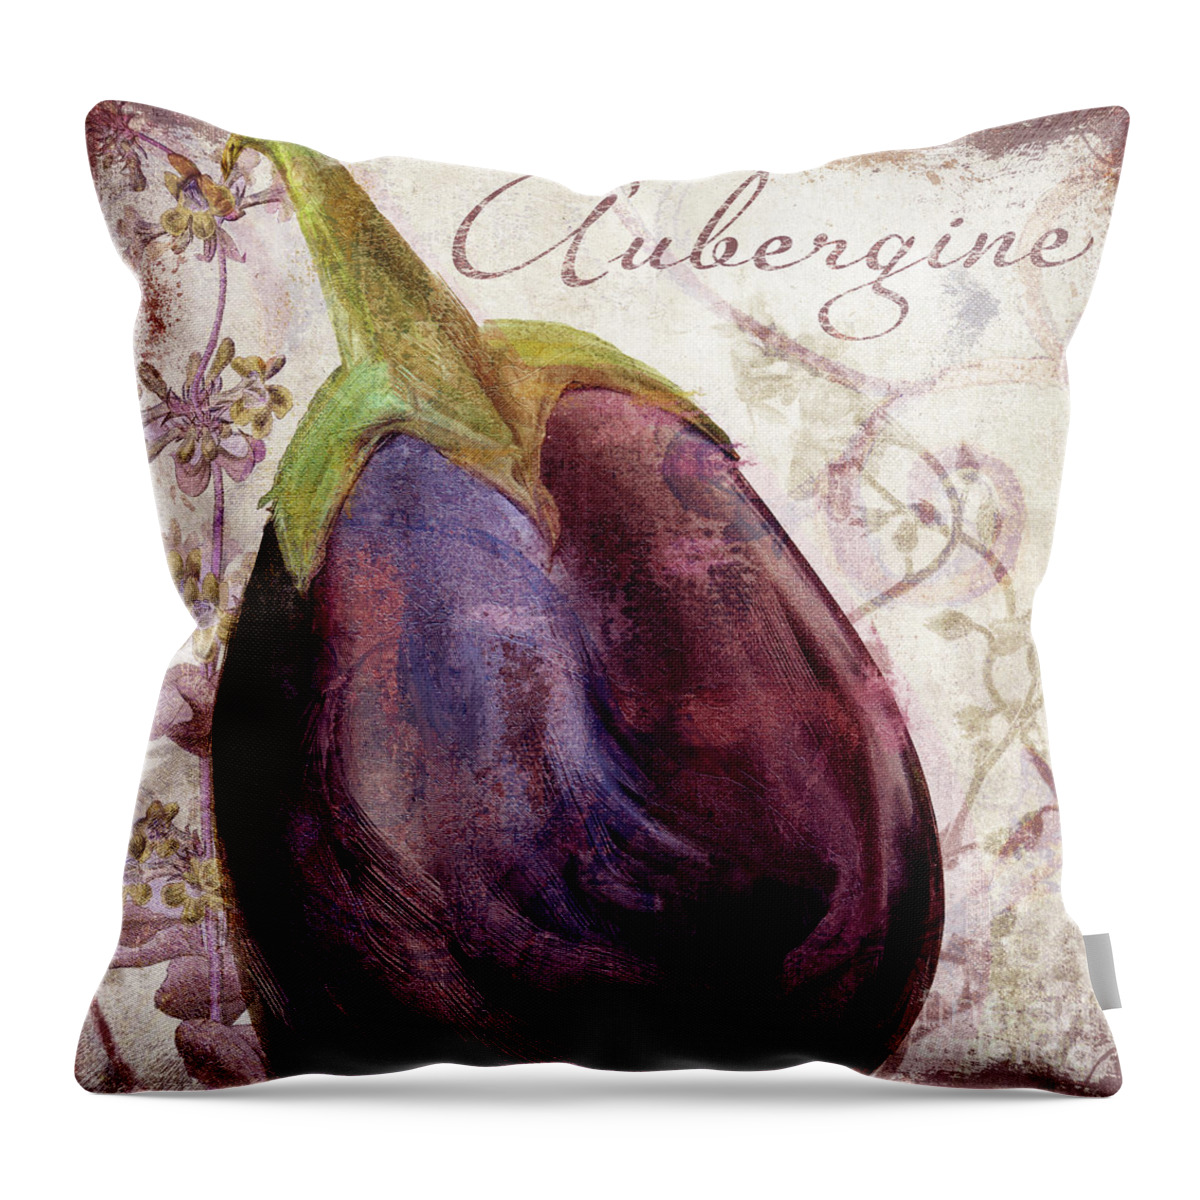 Eggplant Throw Pillow featuring the painting Legumes Francais Eggplant by Mindy Sommers